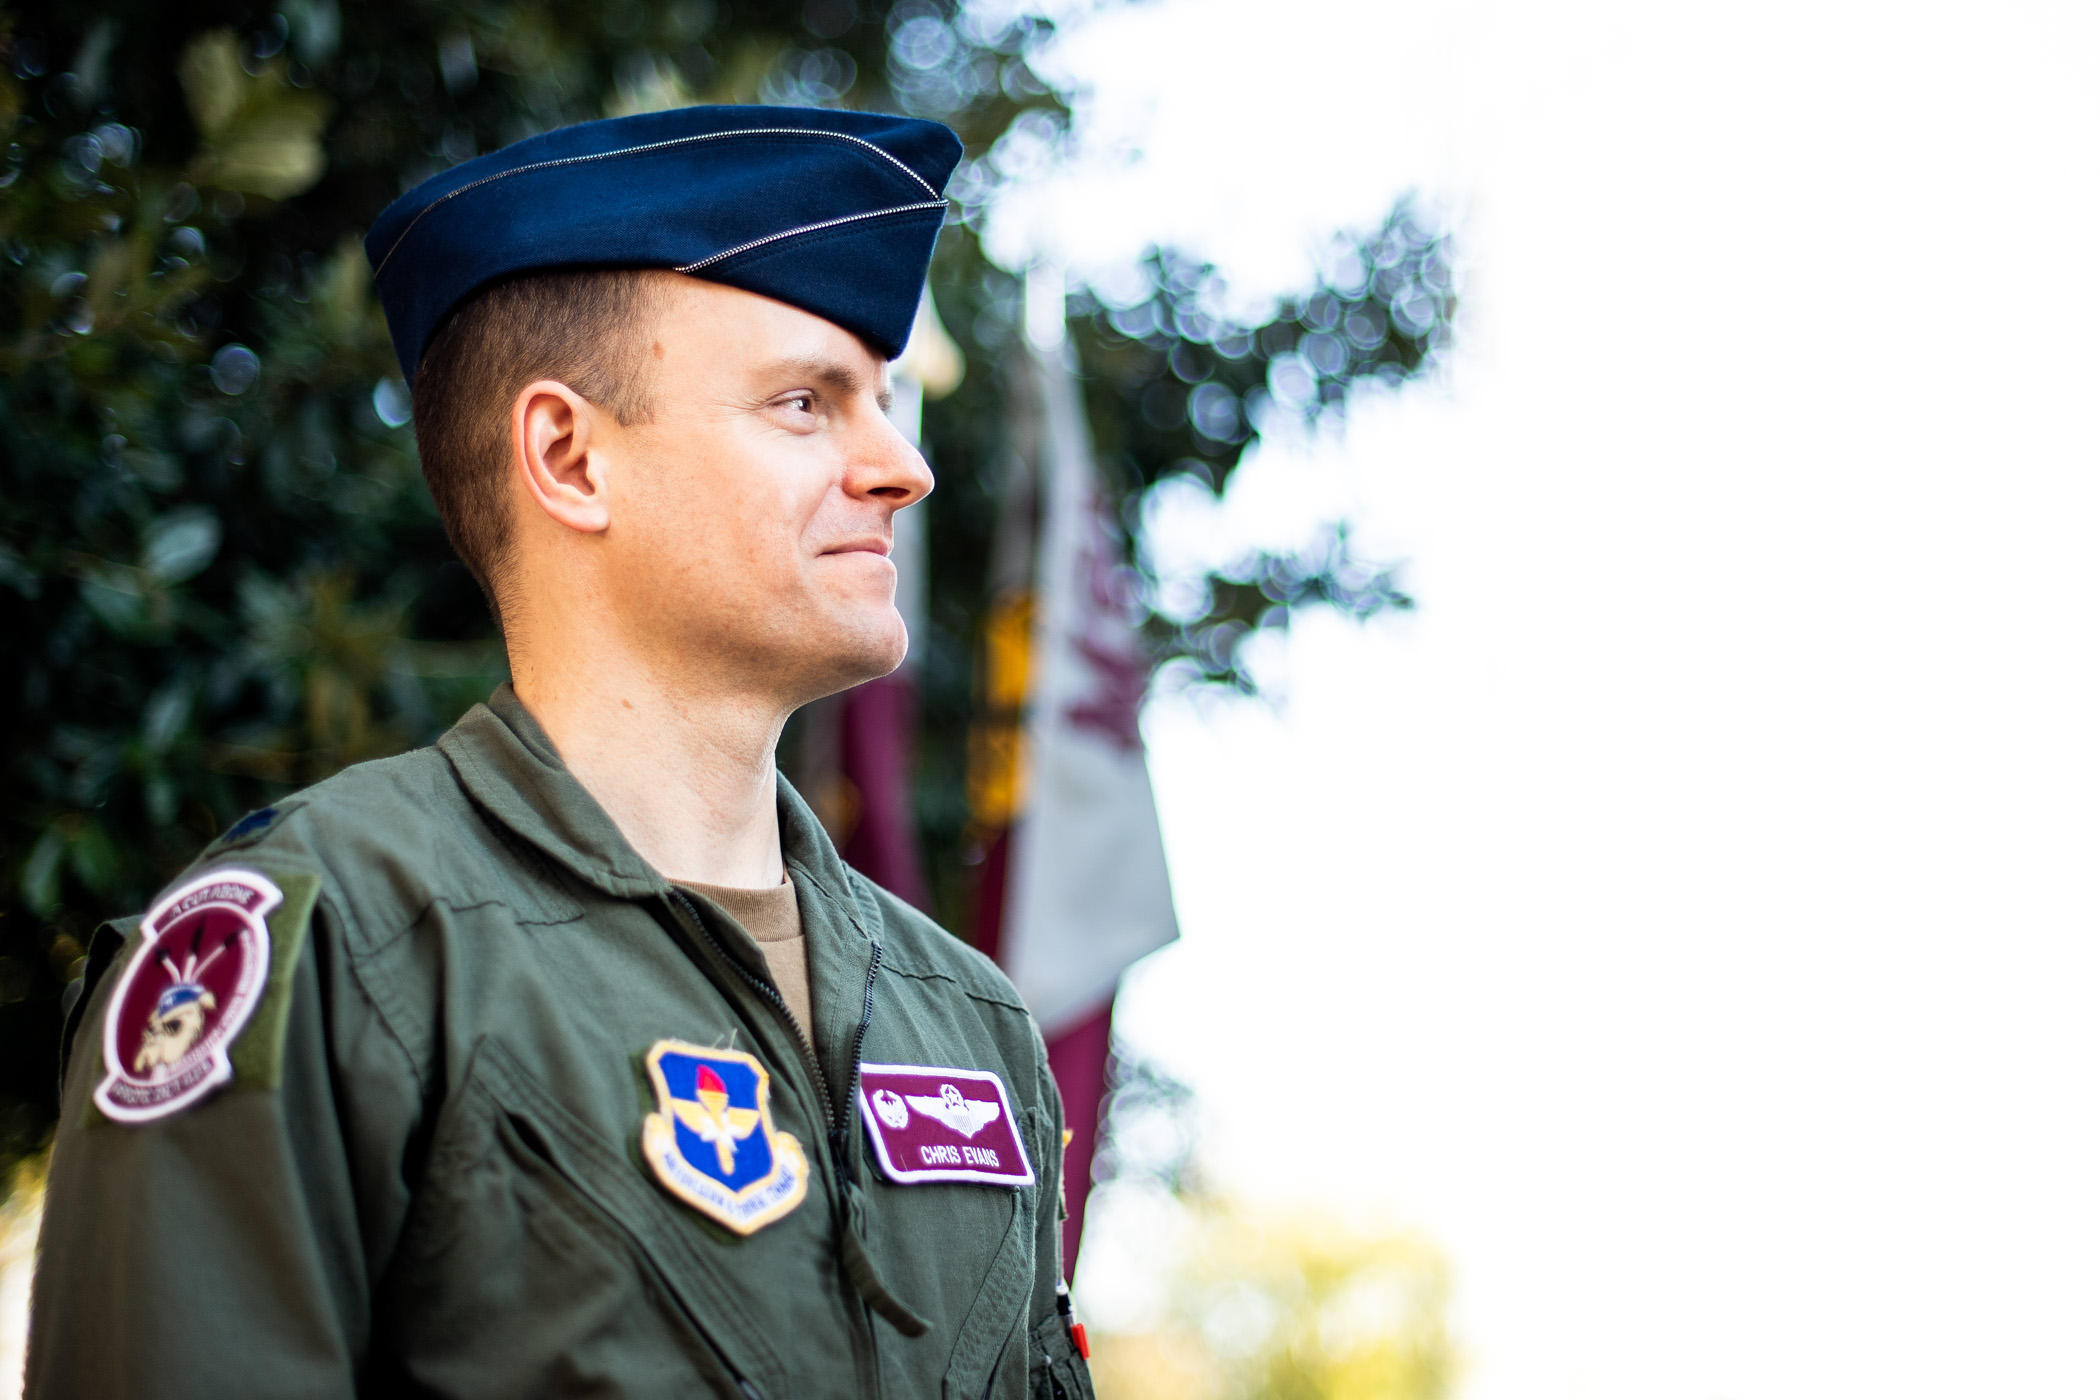 Lt. Col. Christopher S. Evans, pictured wearing his Air Force uniform on the MSU campus